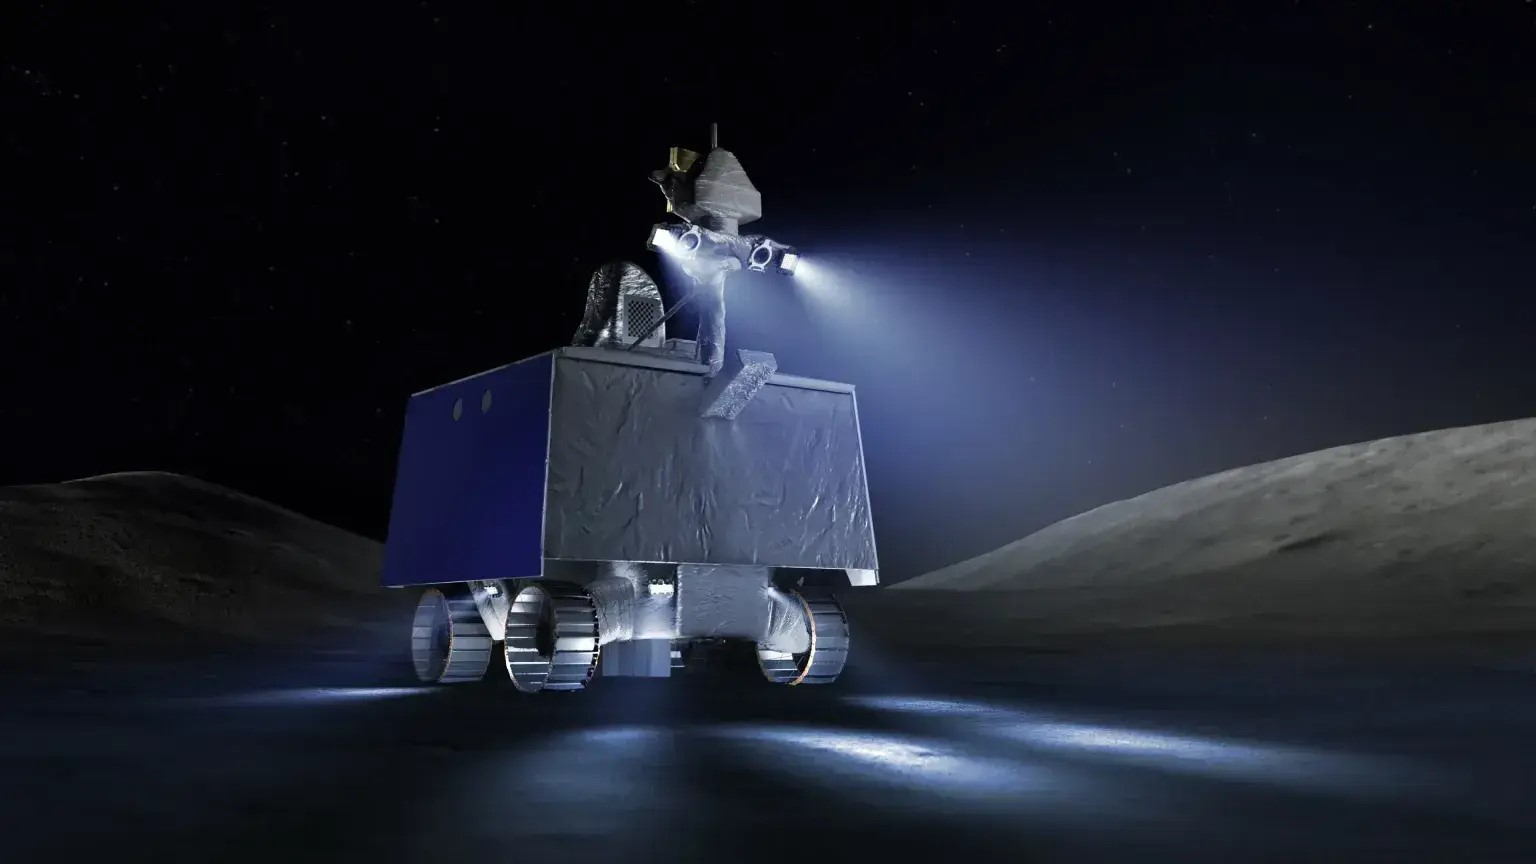 NASA Space Technology an rectangular-bodied rover with three viewed ribbed wheels, shines two lights from the high of a rapid mast on the high entrance of its body. It be viewed aspect is a solar panel. The lights illuminate the grey floor straight in entrance of the rover. A shaded sky hangs above.